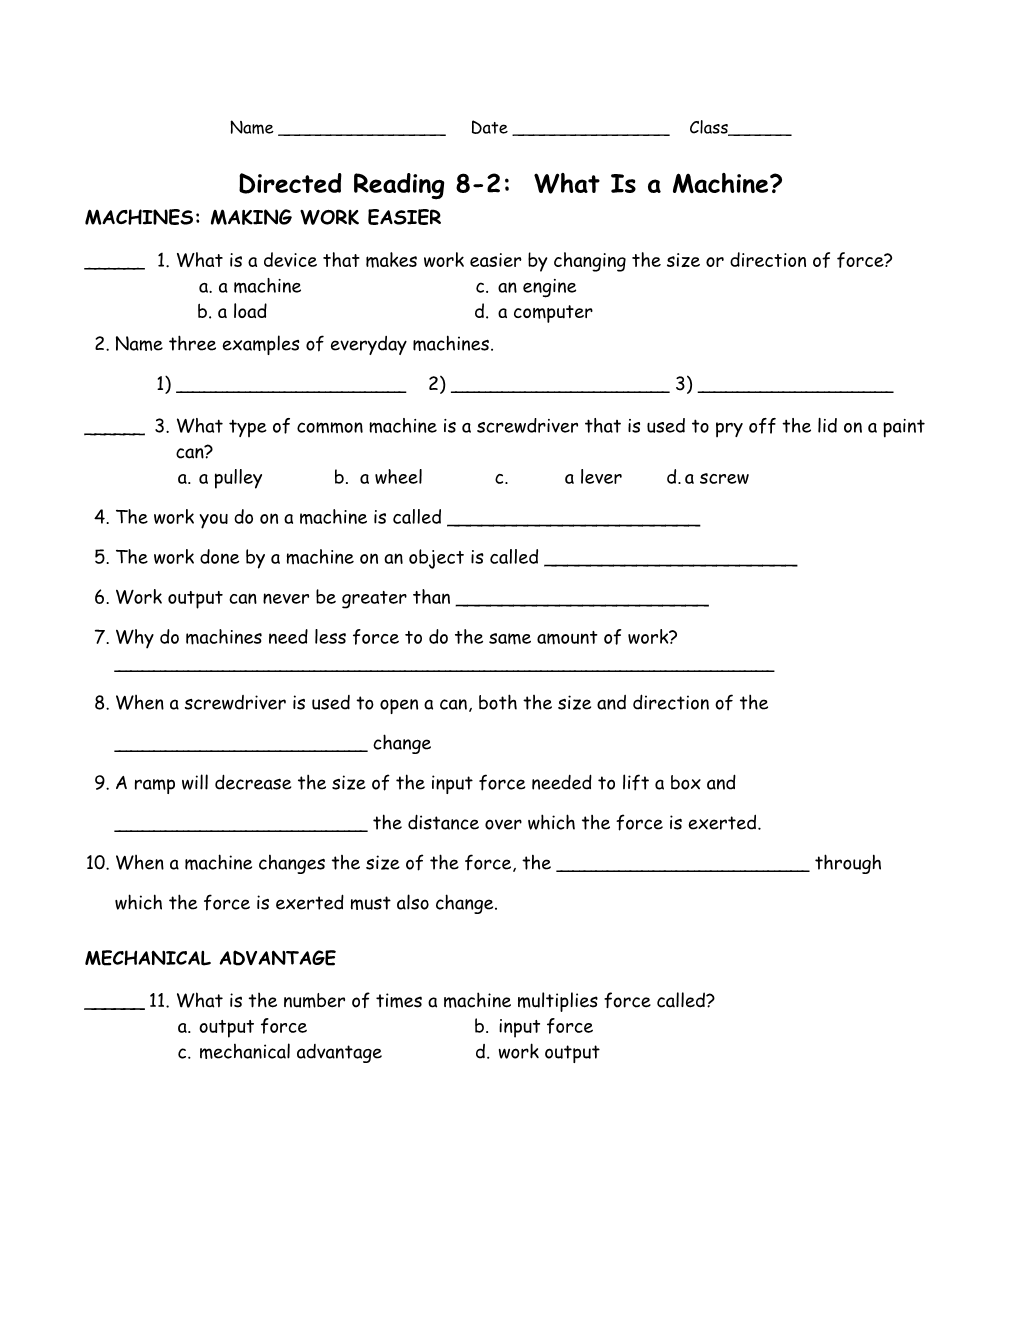 Directed Reading 8-2: What Is a Machine?